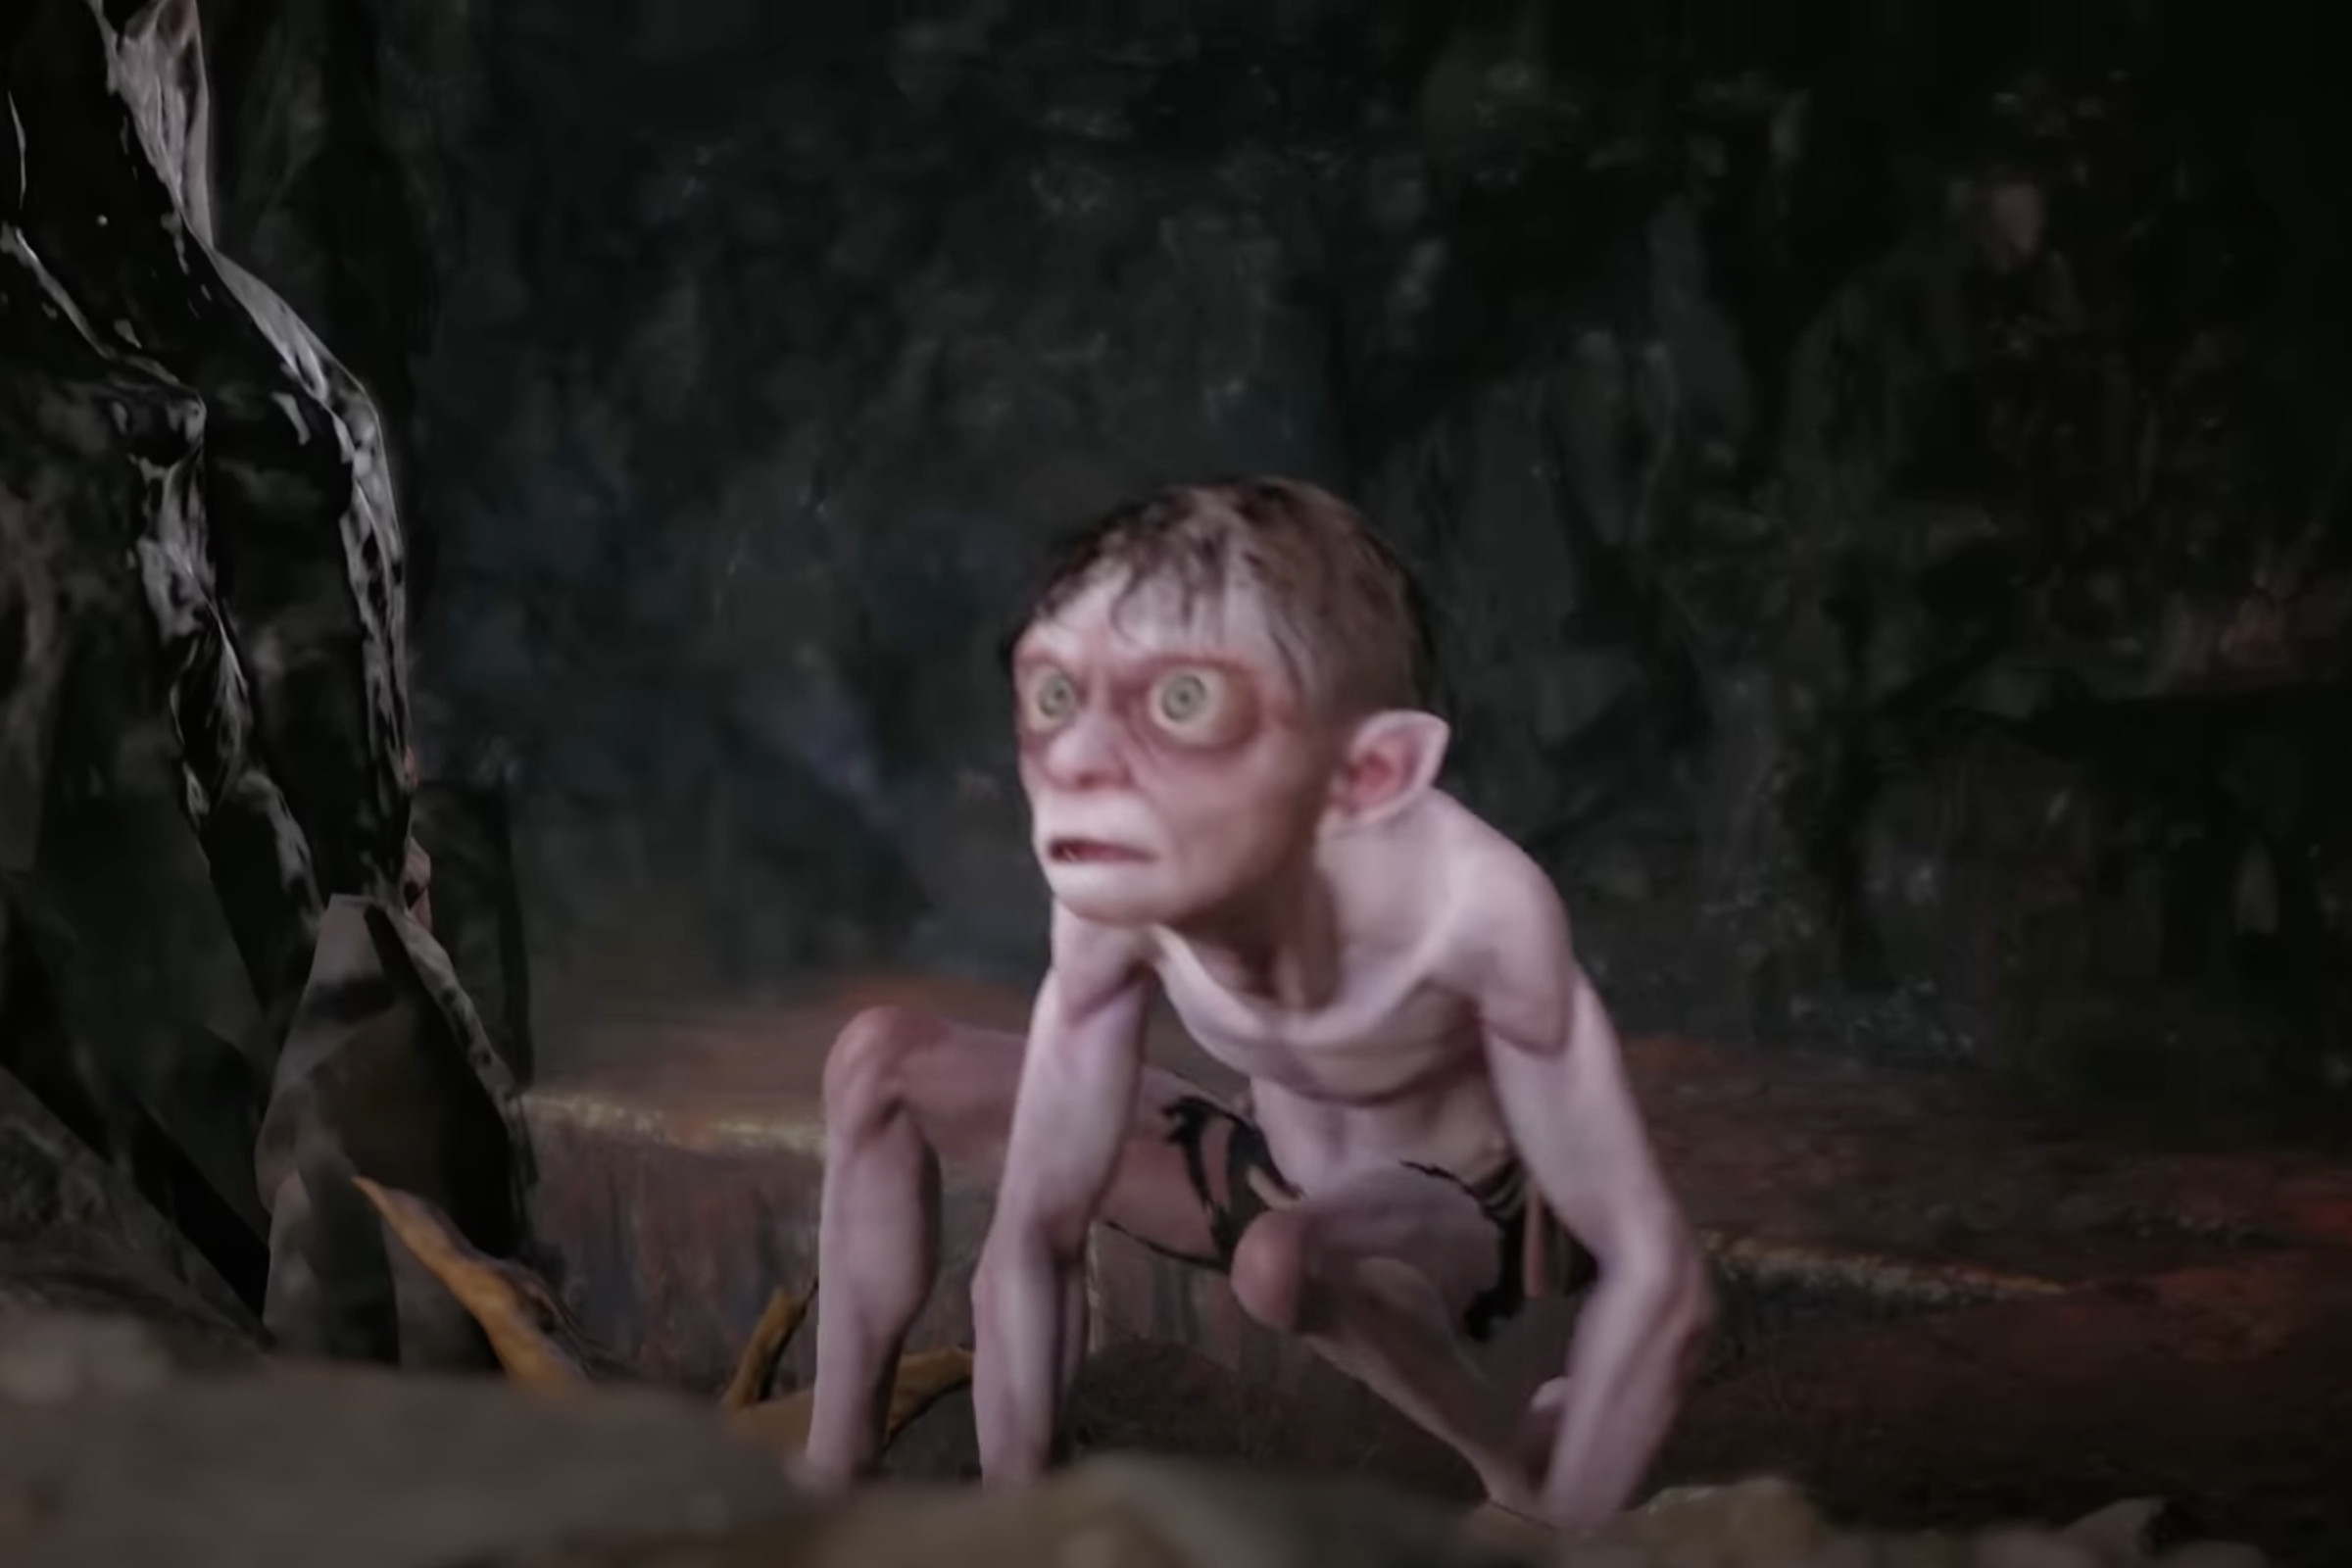 Image of Gollum staring into the distance.